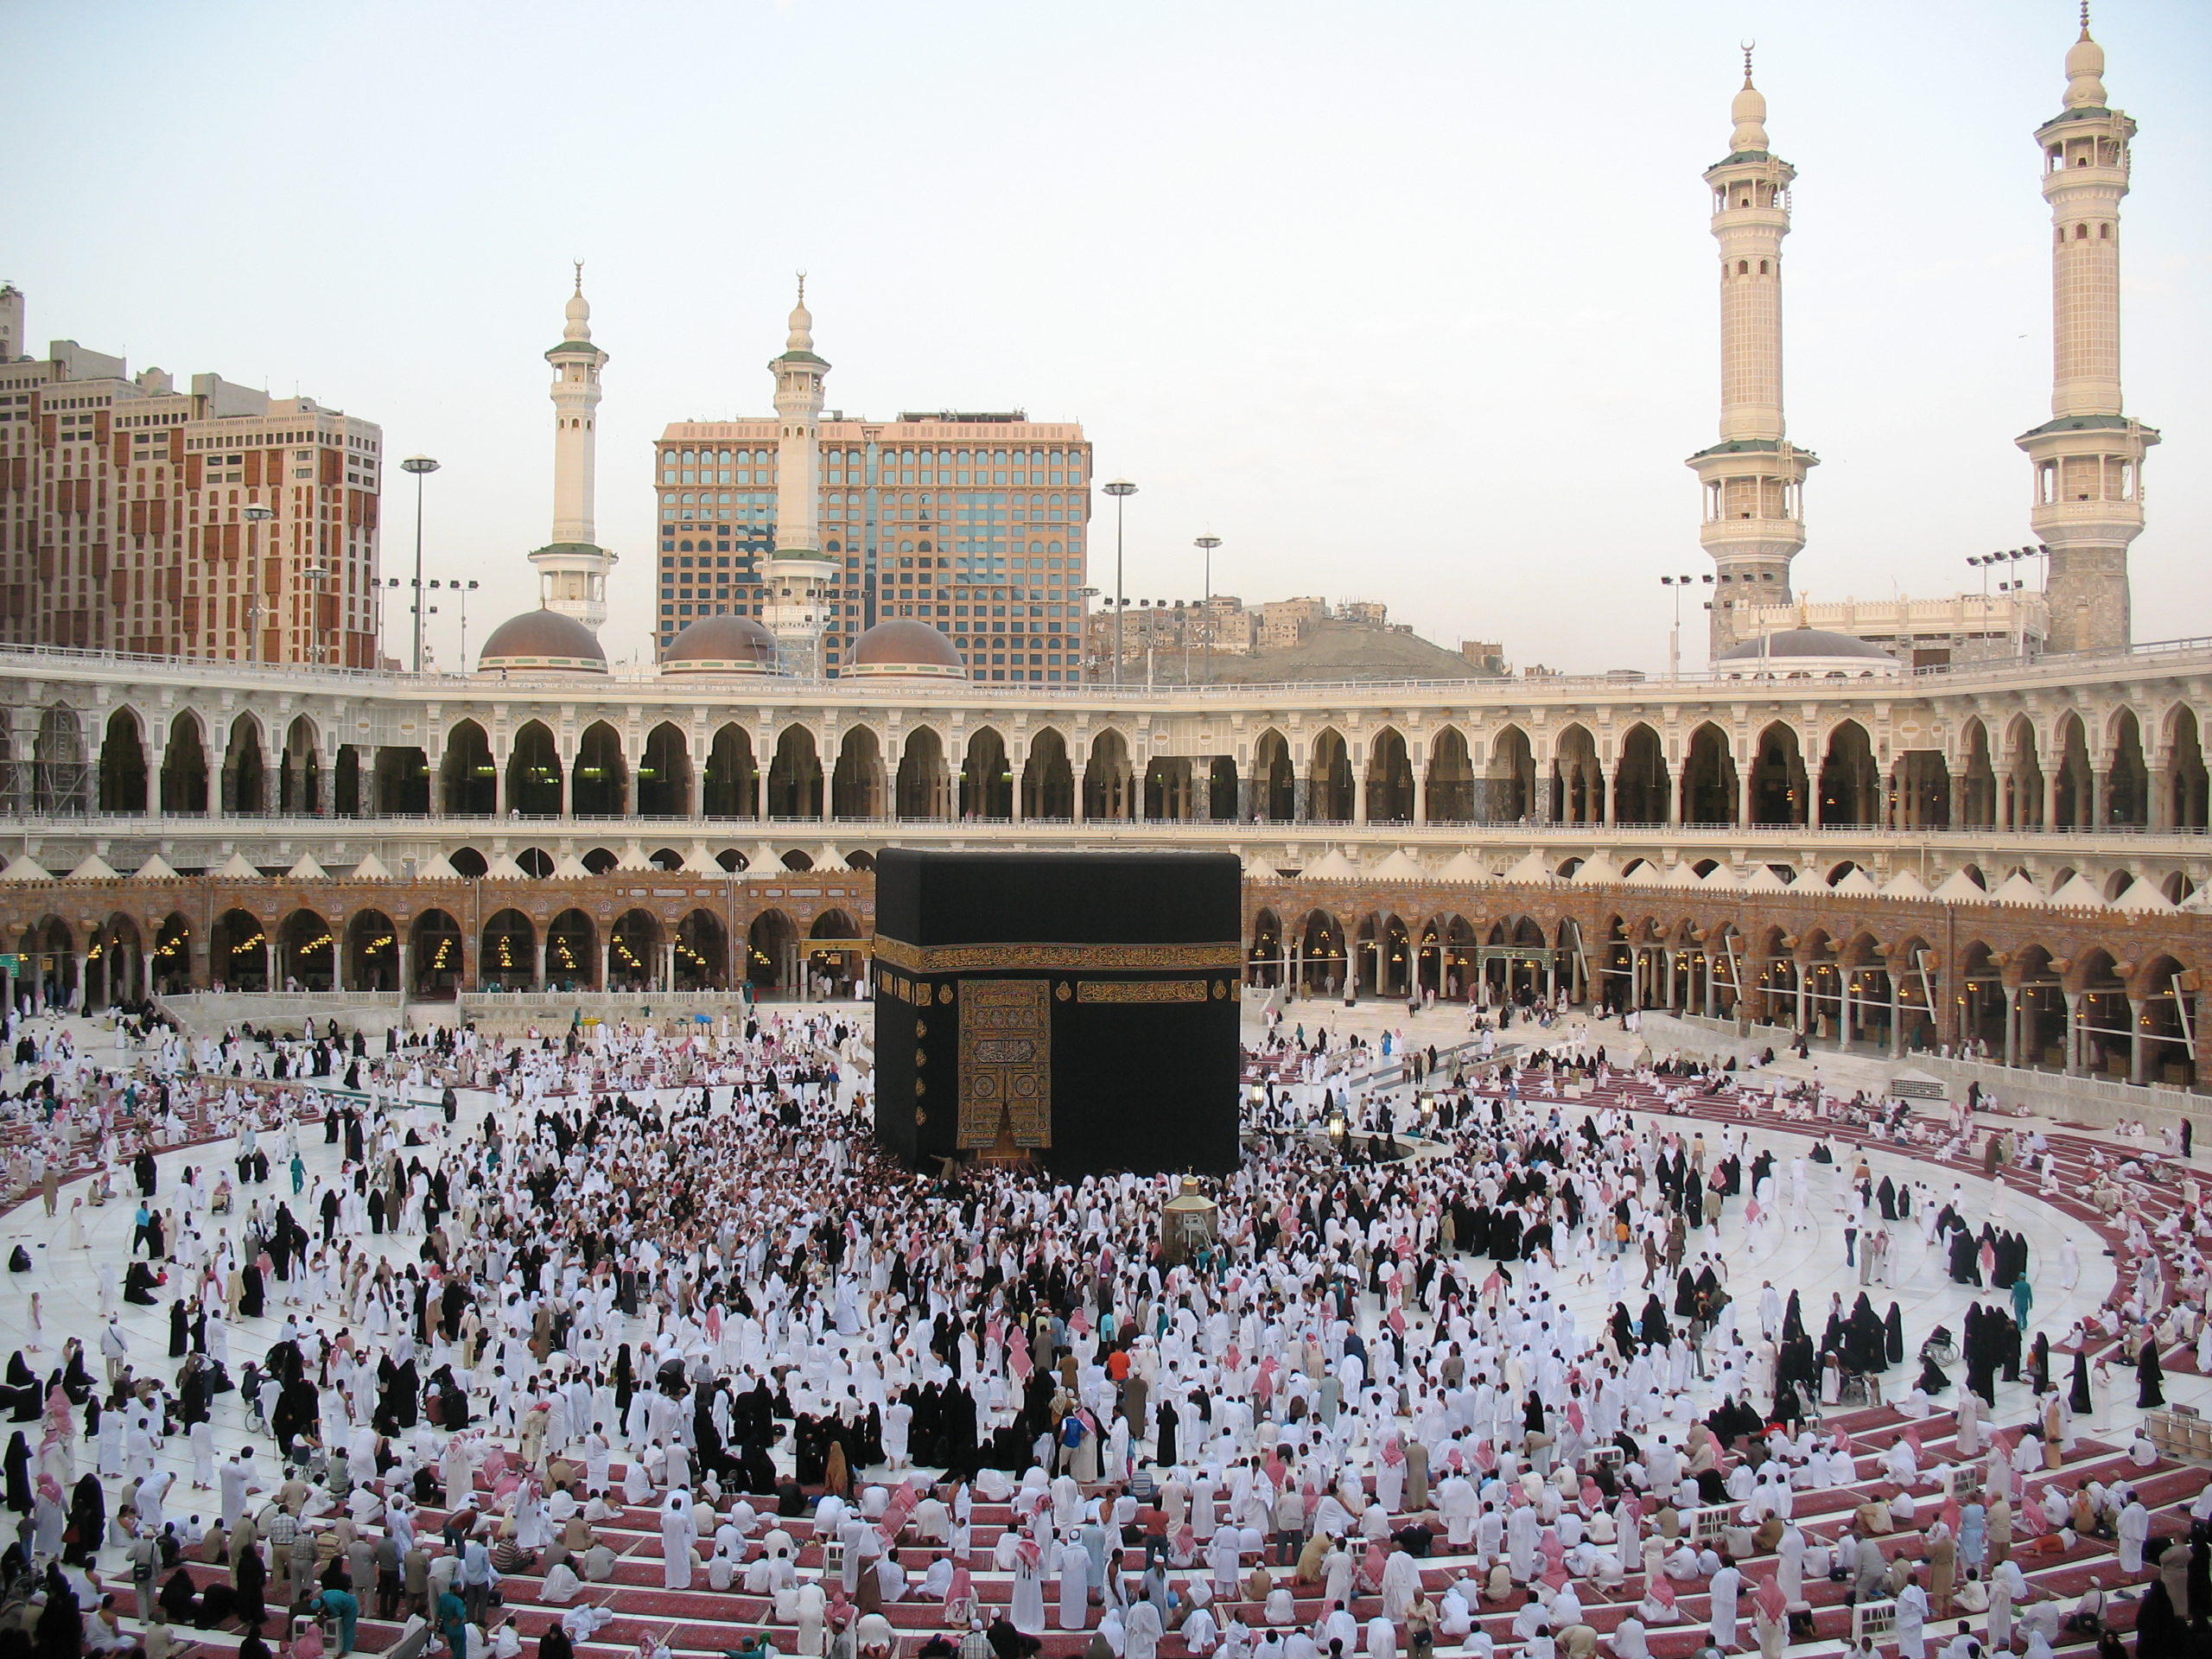 Kaaba with surrounding colonnades (photo: marviikad, CC BY-NC 2.0)